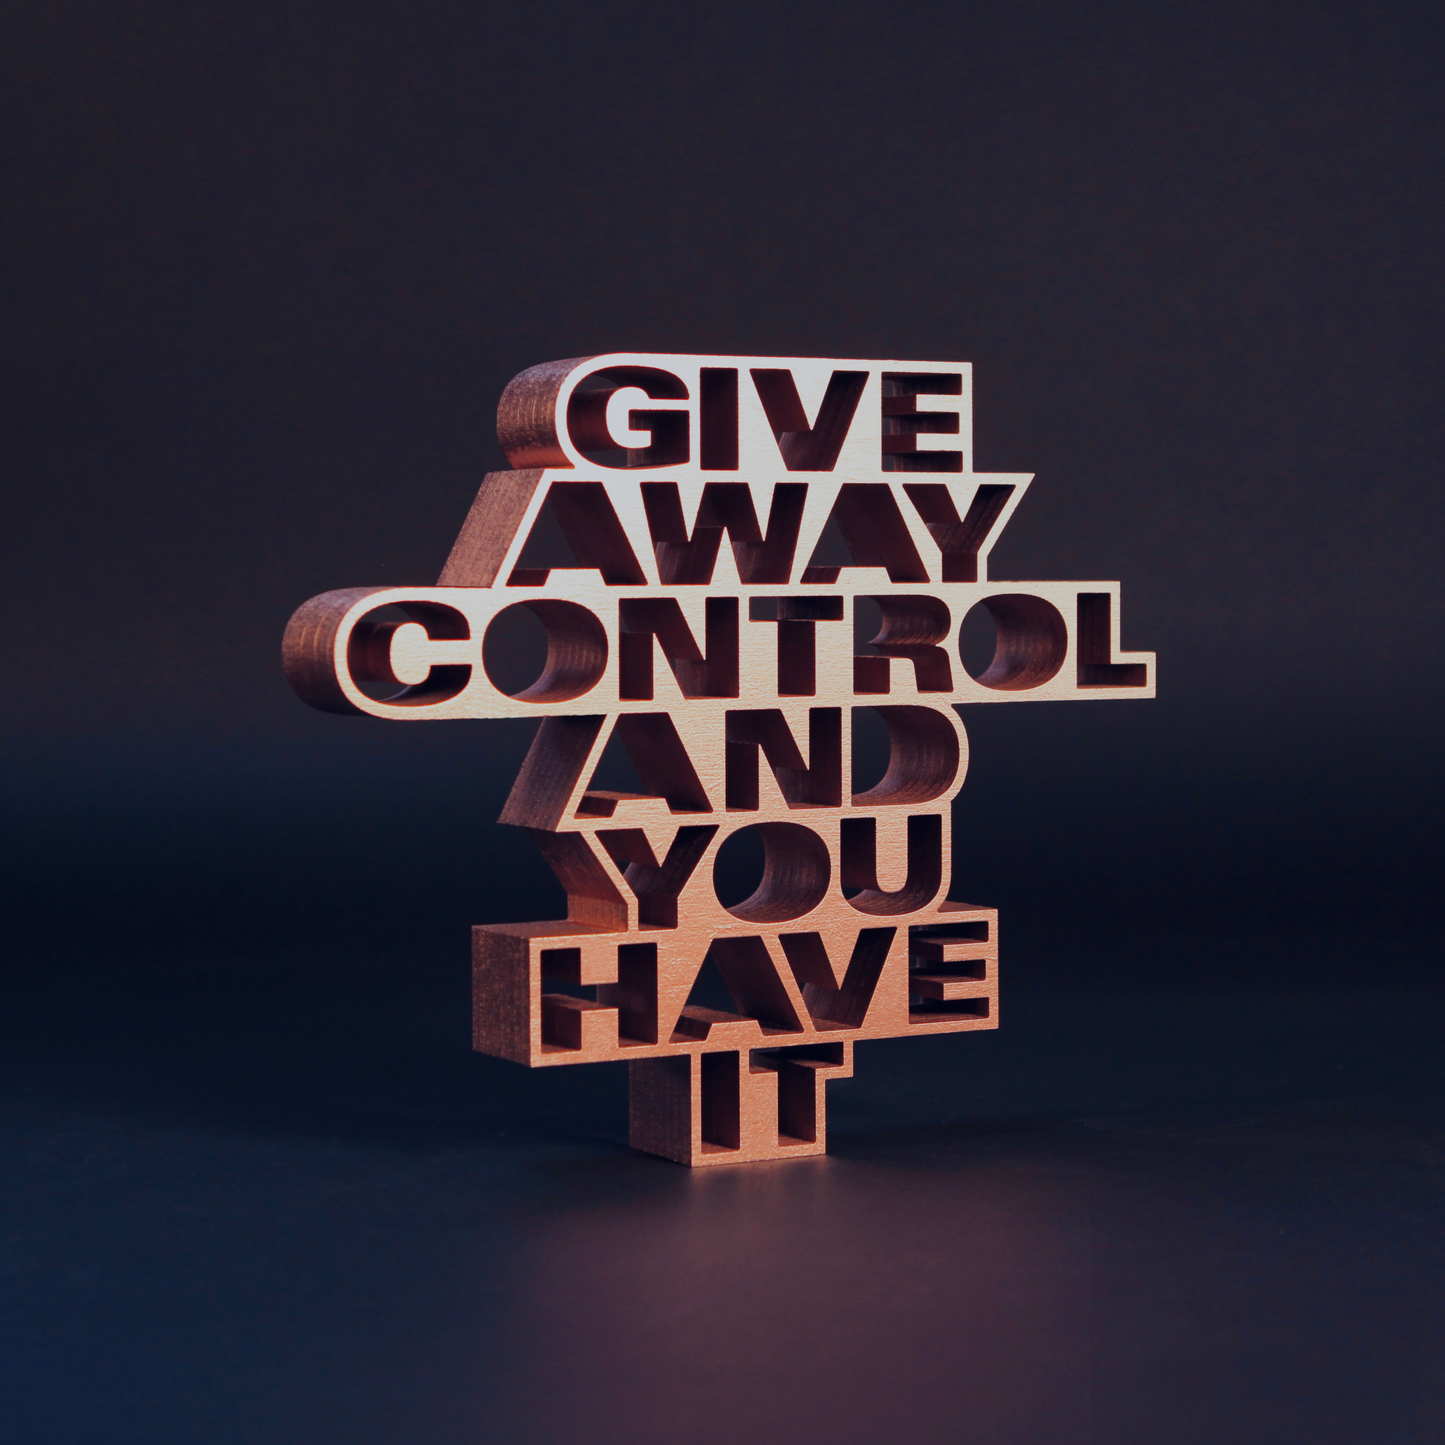 Give away control and you have it